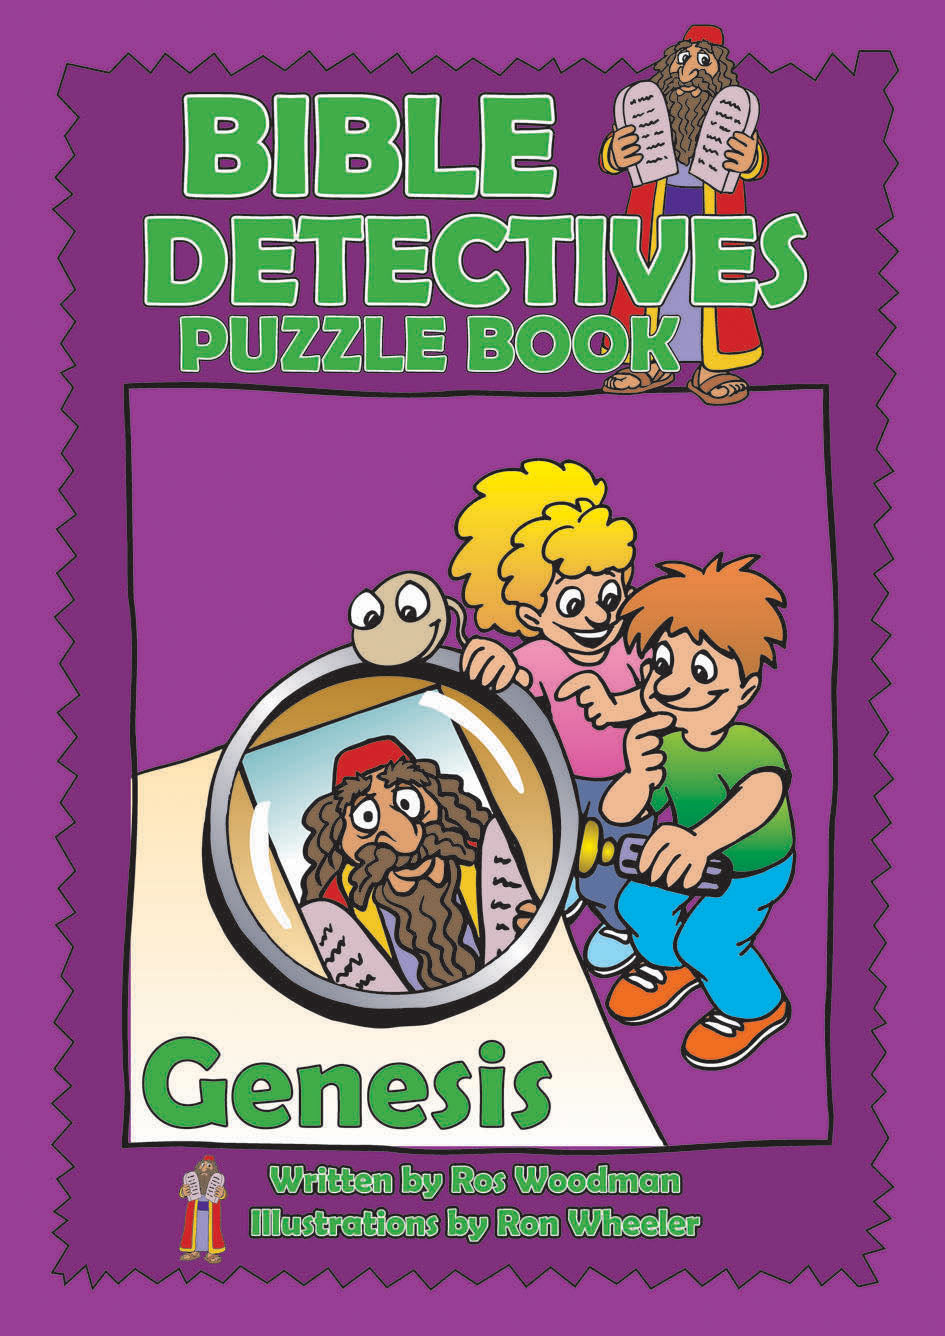 Image of Bible Detectives Puzzle Book other